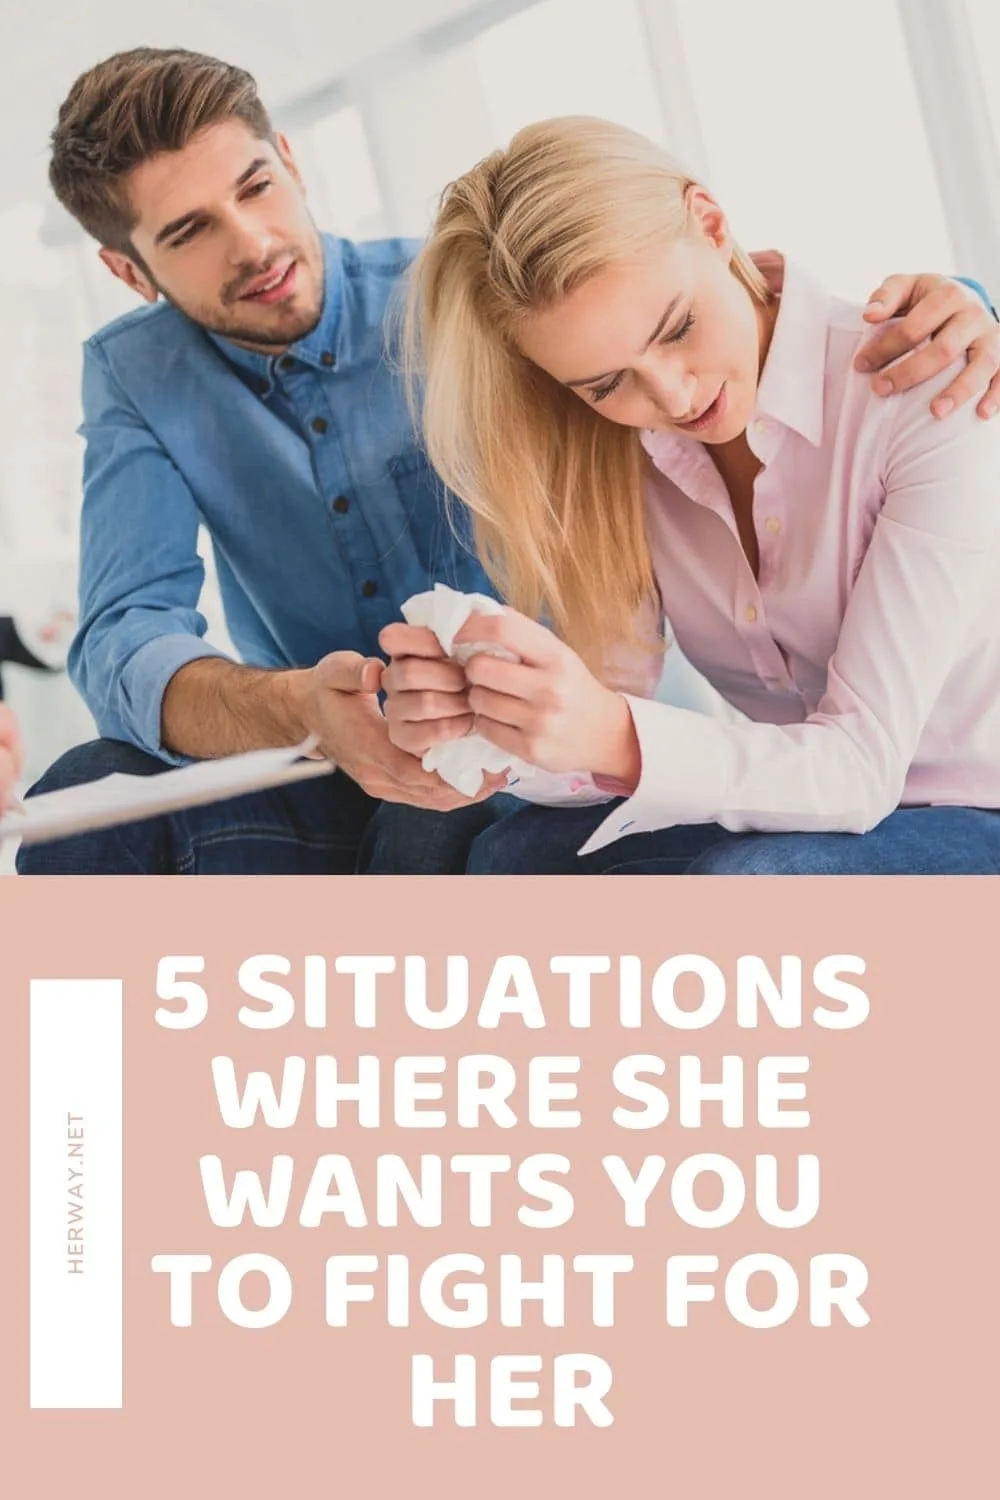 5 Situations Where She Wants You To Fight For Her